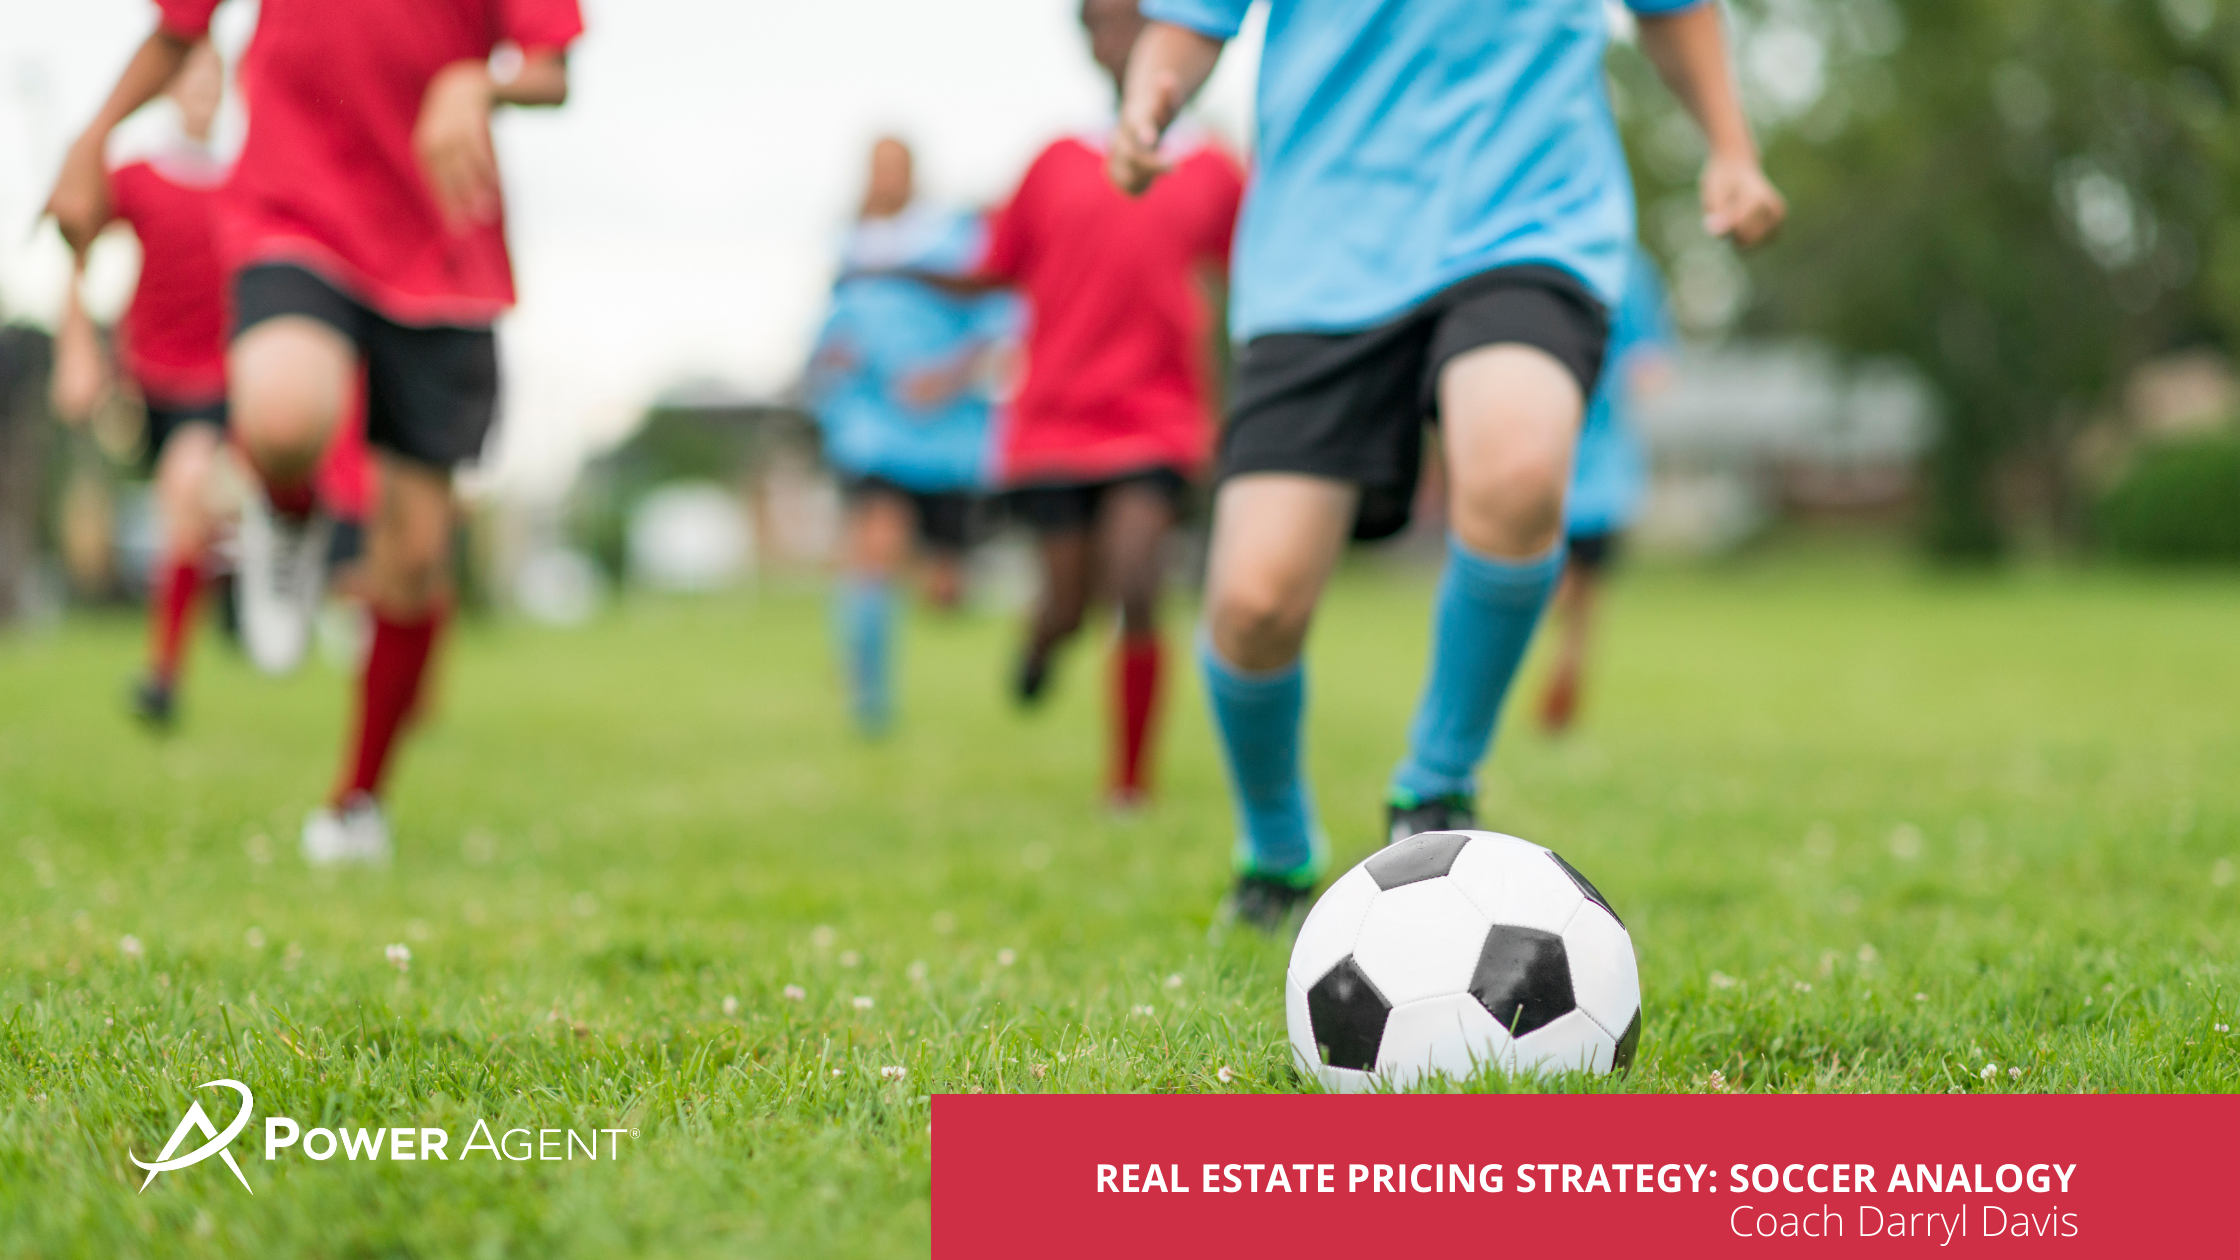 Tuesday Real Estate Tip REAL ESTATE PRICING STRATEGY SOCCER ANALOGY